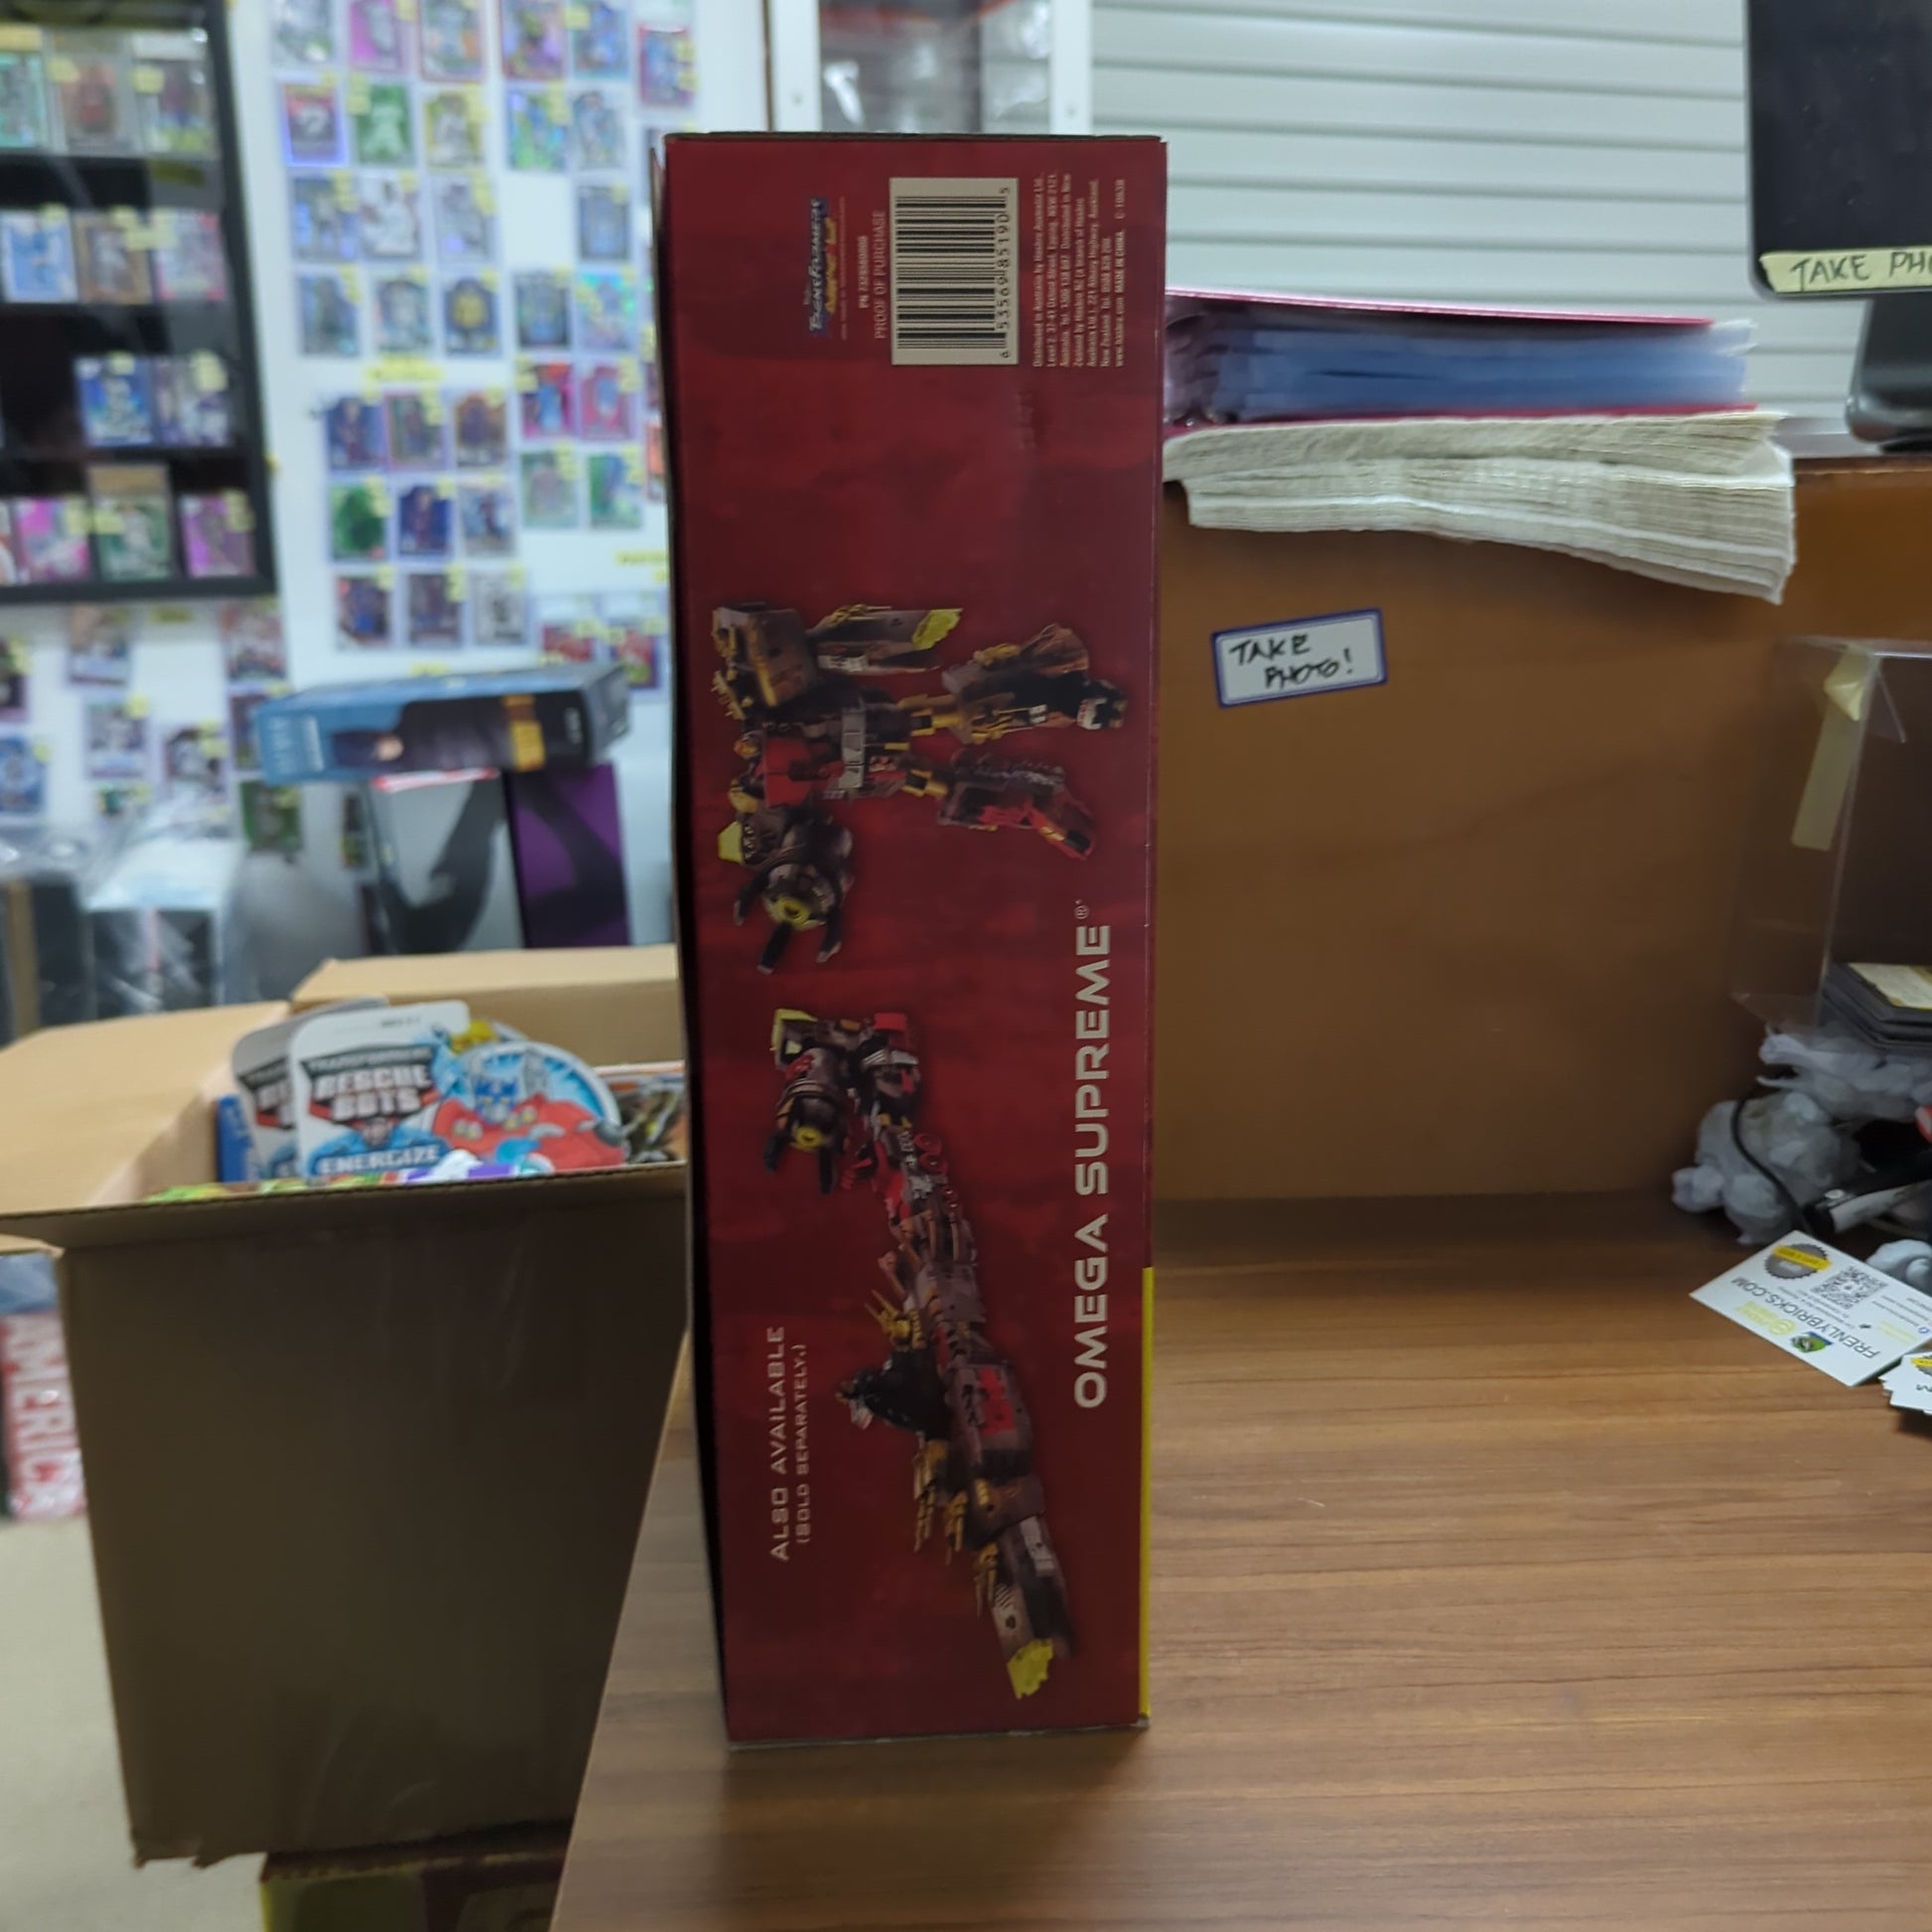 Transformers Optimus Prime Year Of The Snake Platinum Edition. FRENLY BRICKS - Open 7 Days